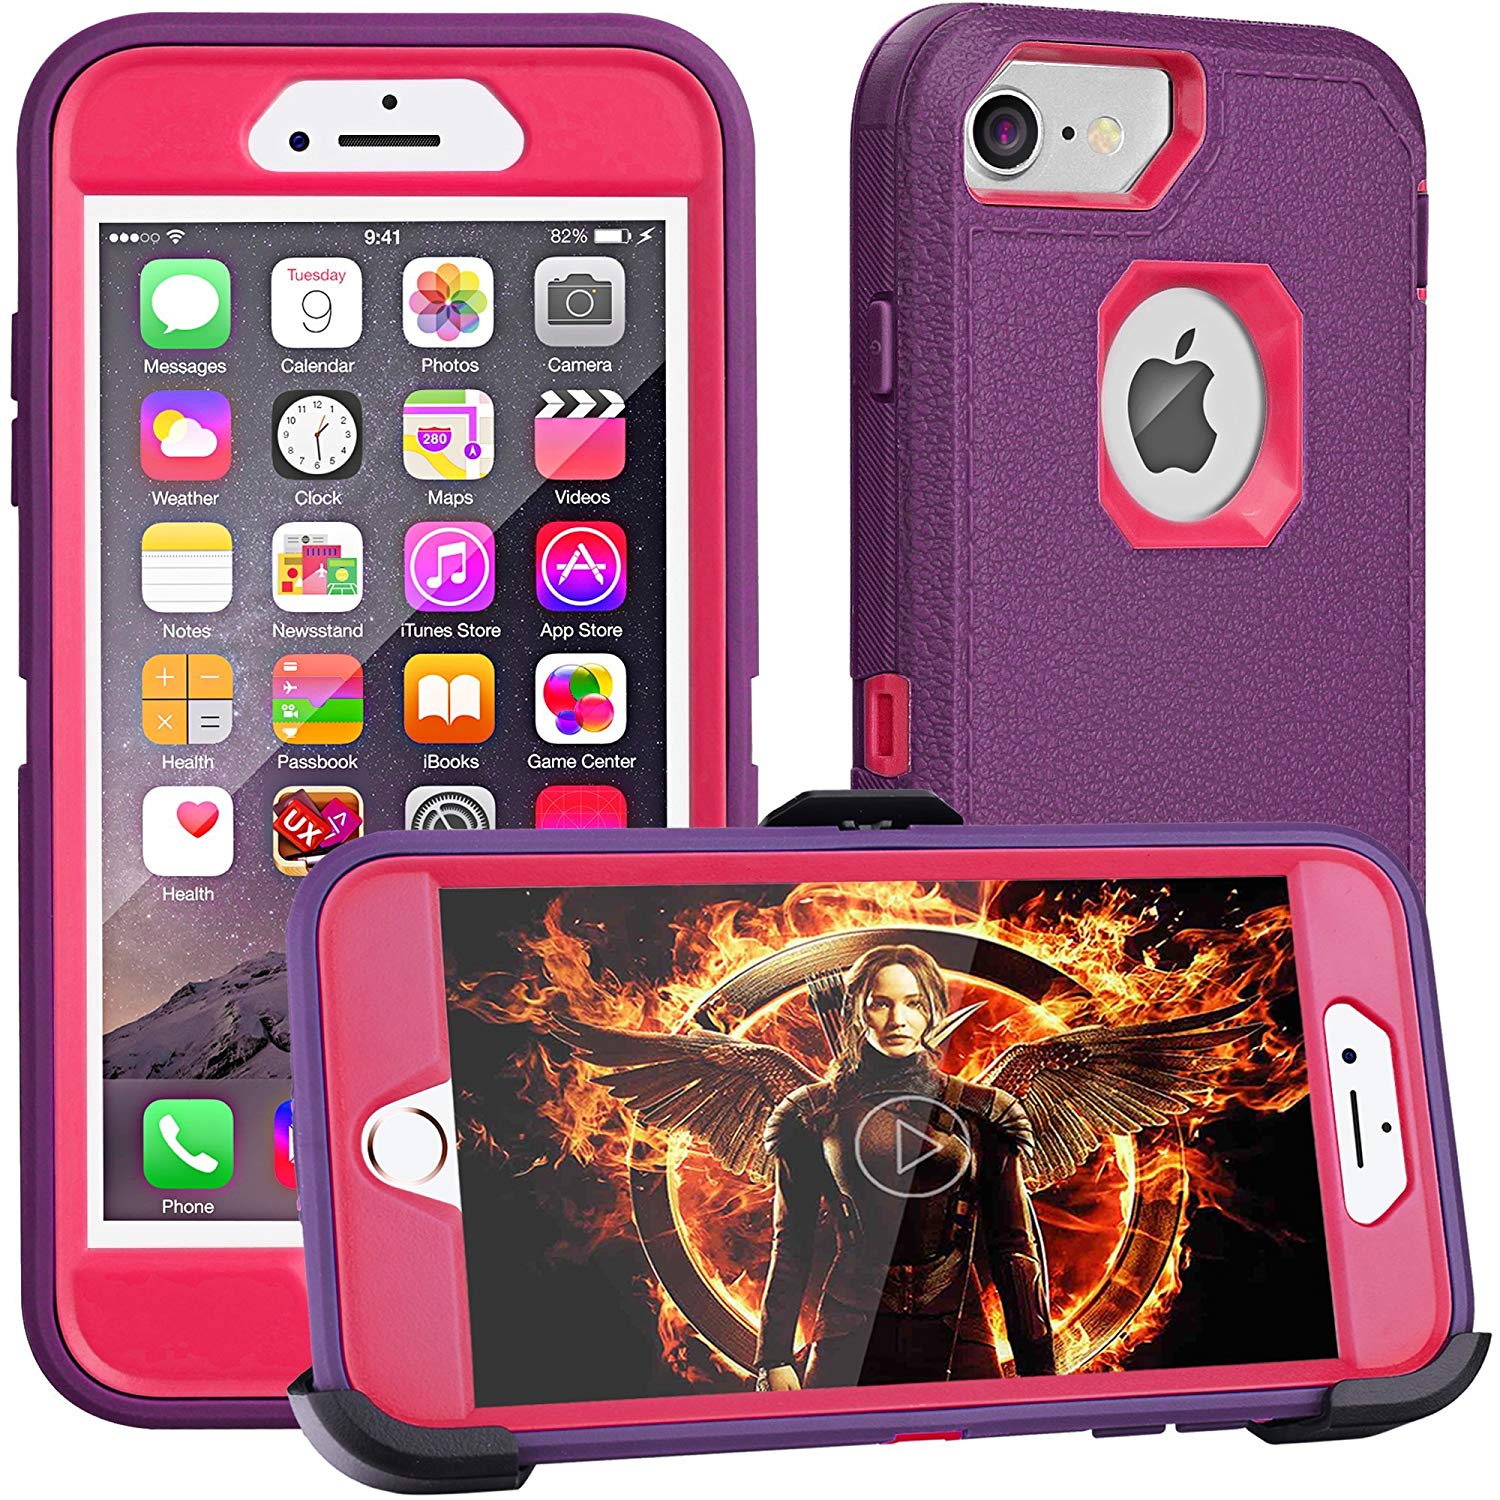 iPhone 8 case,iPhone 7 Case, iPhone 6s Case, FOGEEK [Dust-Proof] Belt-Clip Heavy Duty Kickstand Cover [Shockproof] PC+TPU Shell for Apple iPhone 7 and iPhone 6/6s(Purple and Rose)